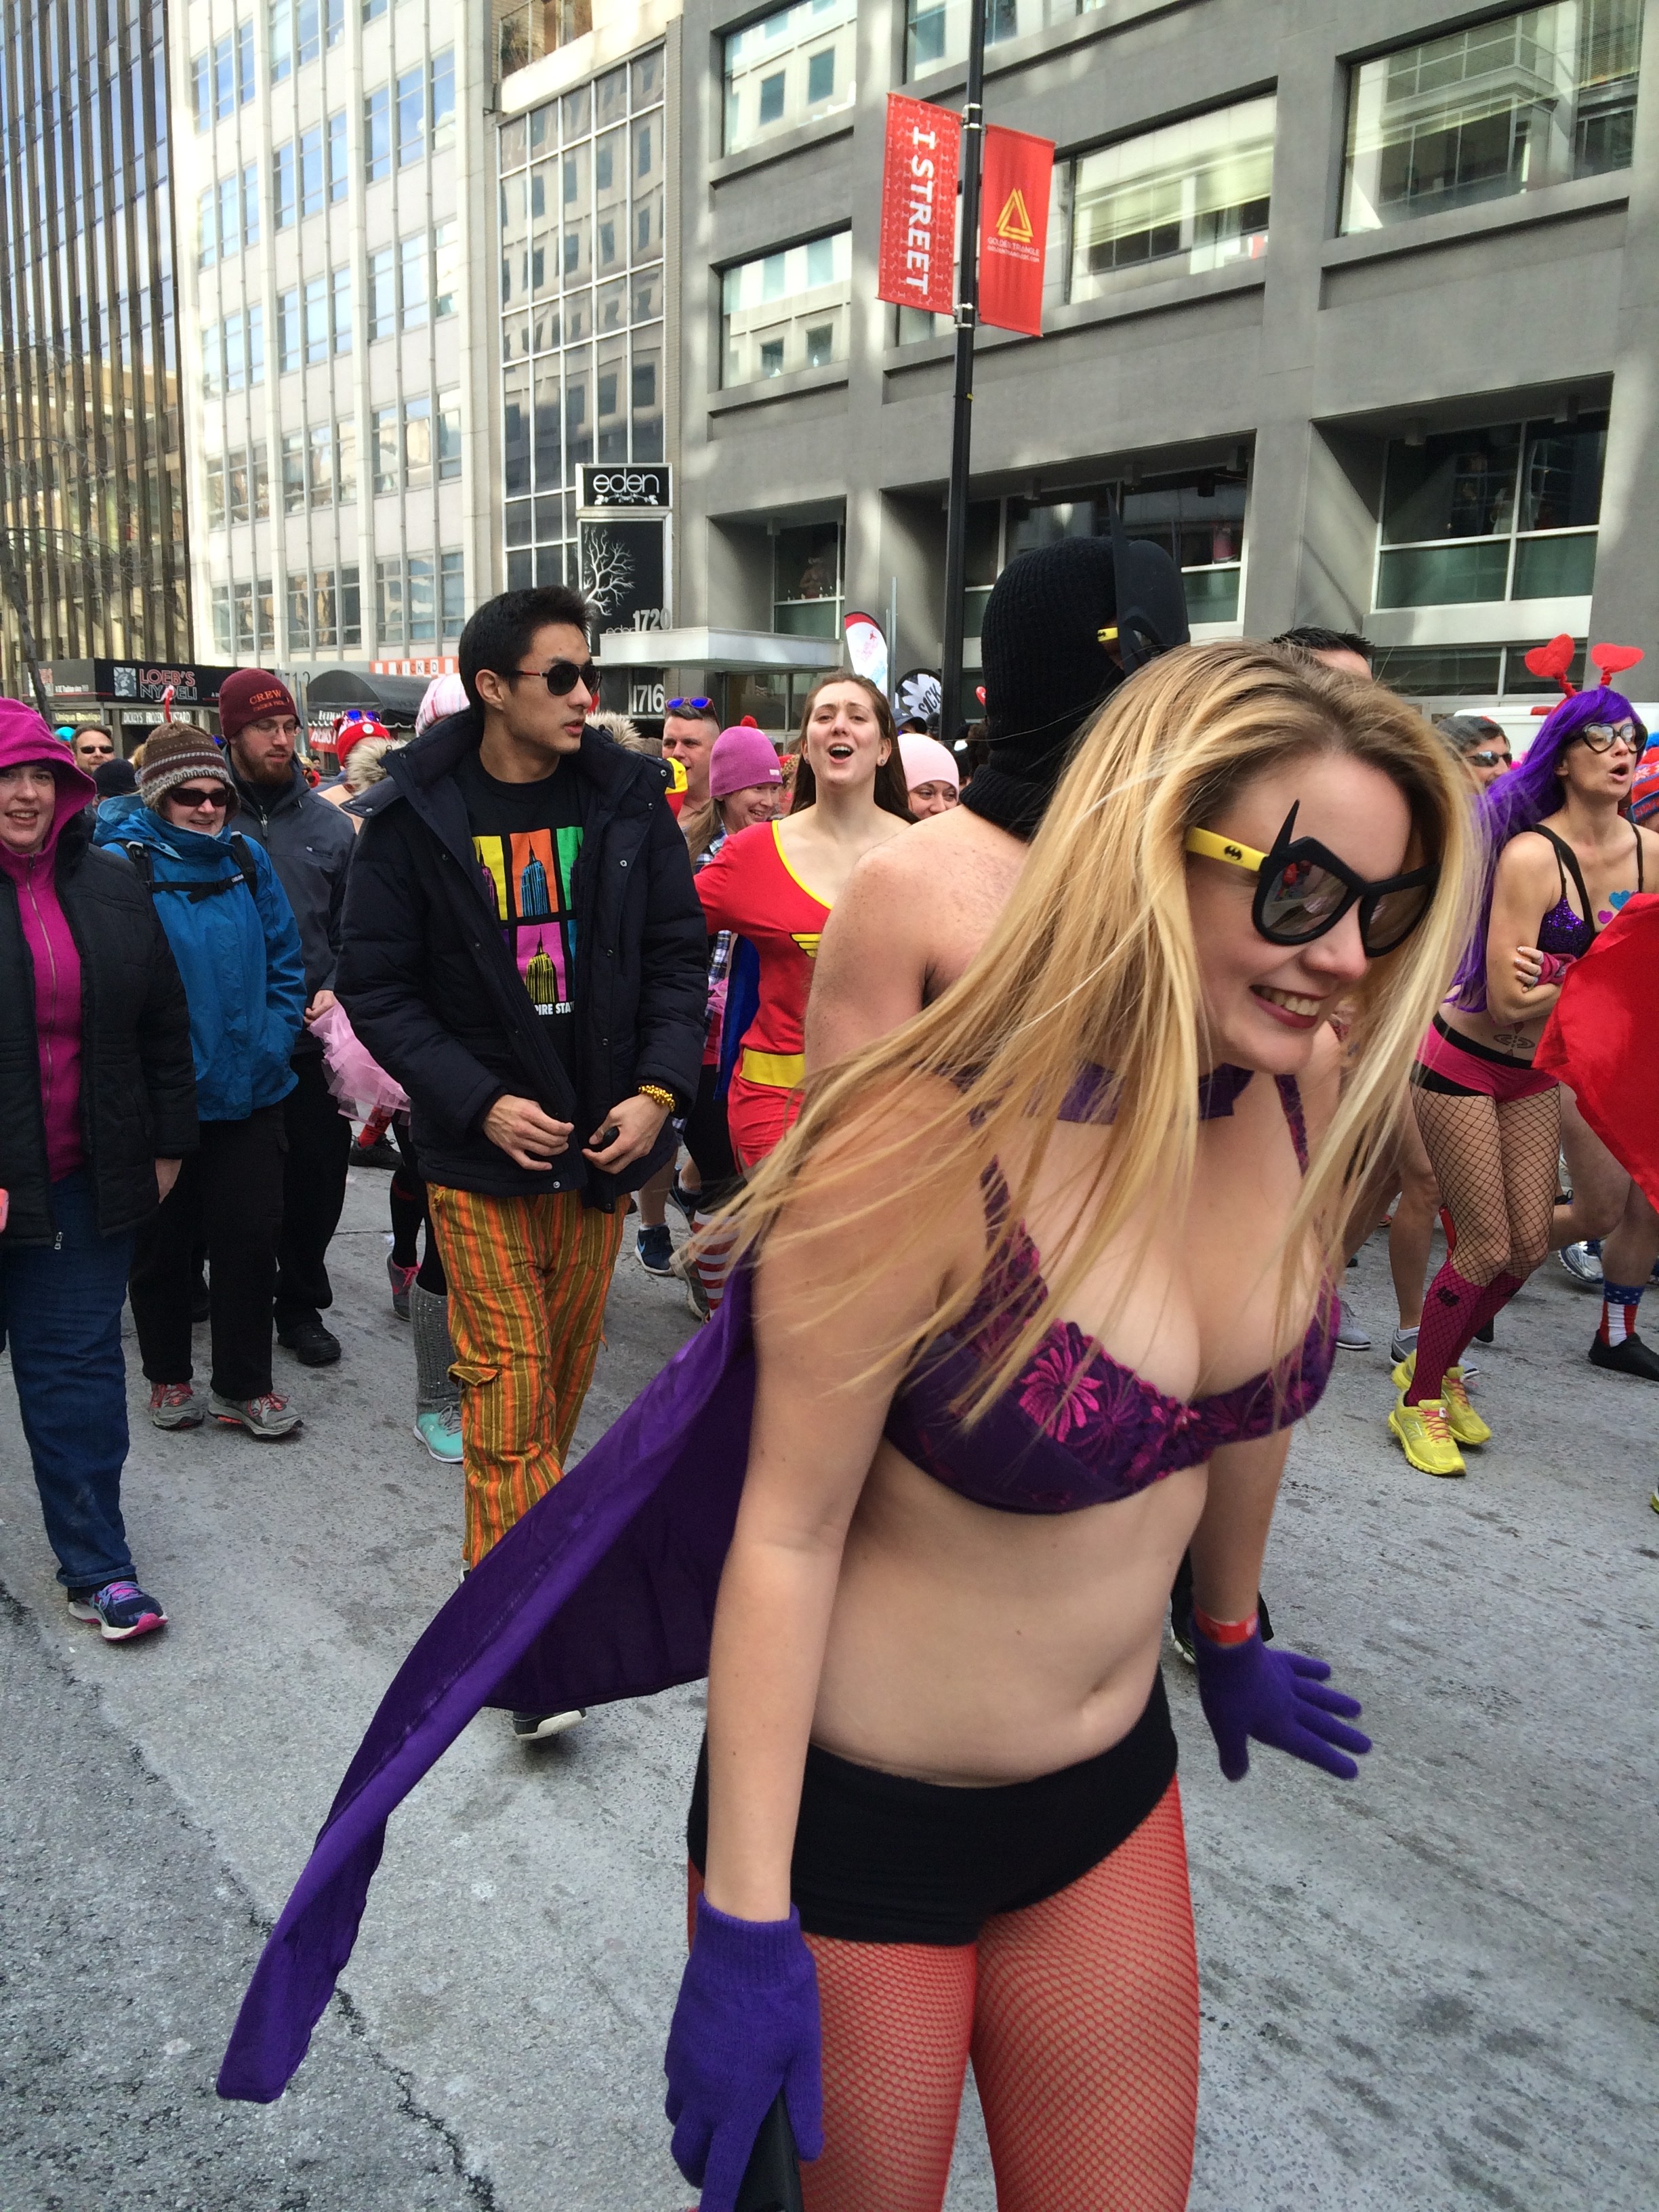 Runners brave bitter cold for Cupid’s Undie Run